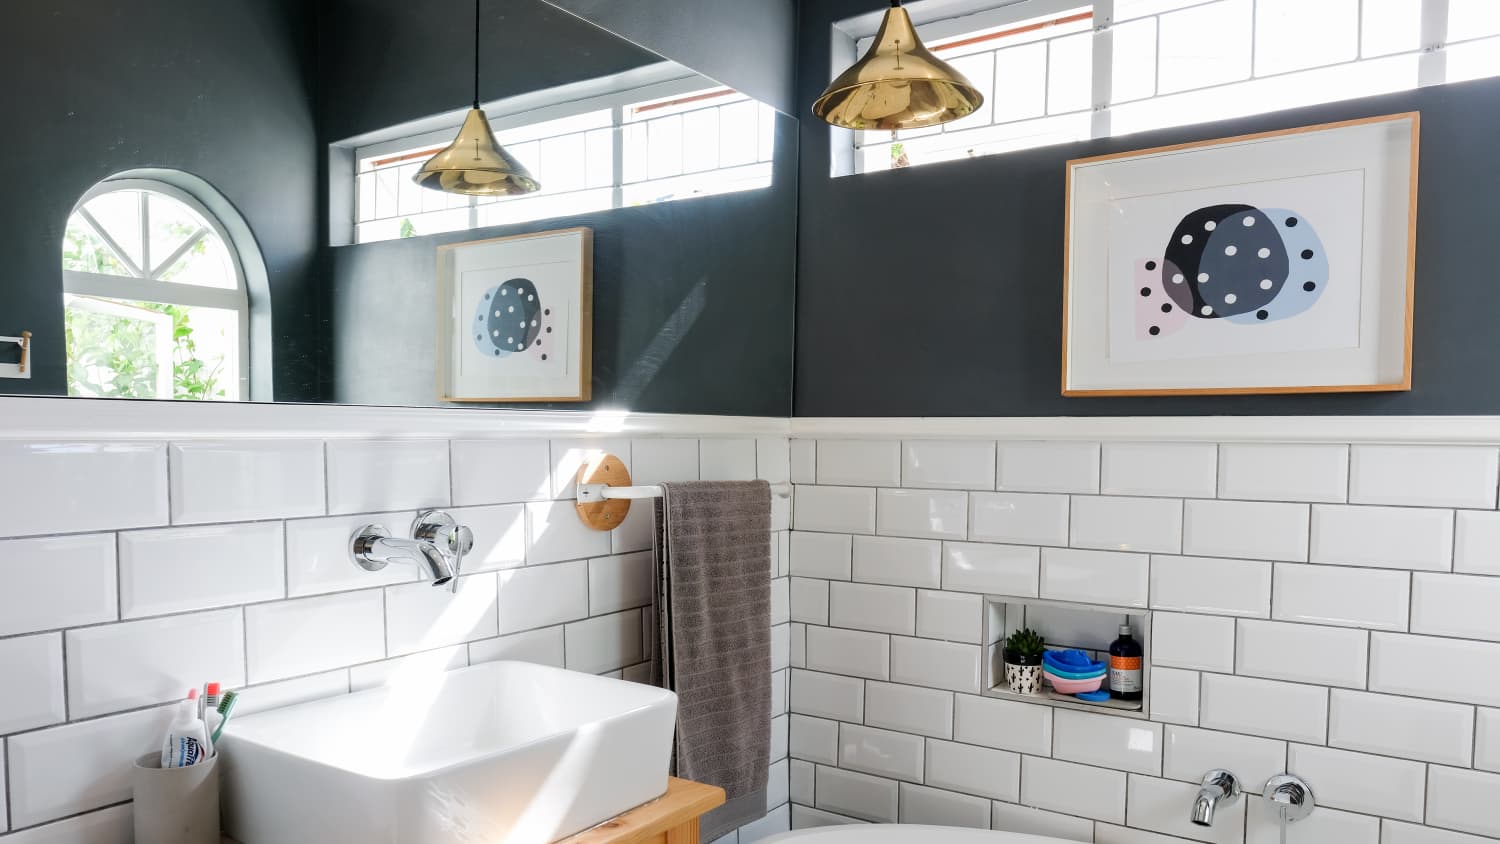 No More Unused Space: How To Fit More Storage into a Small Bathroom